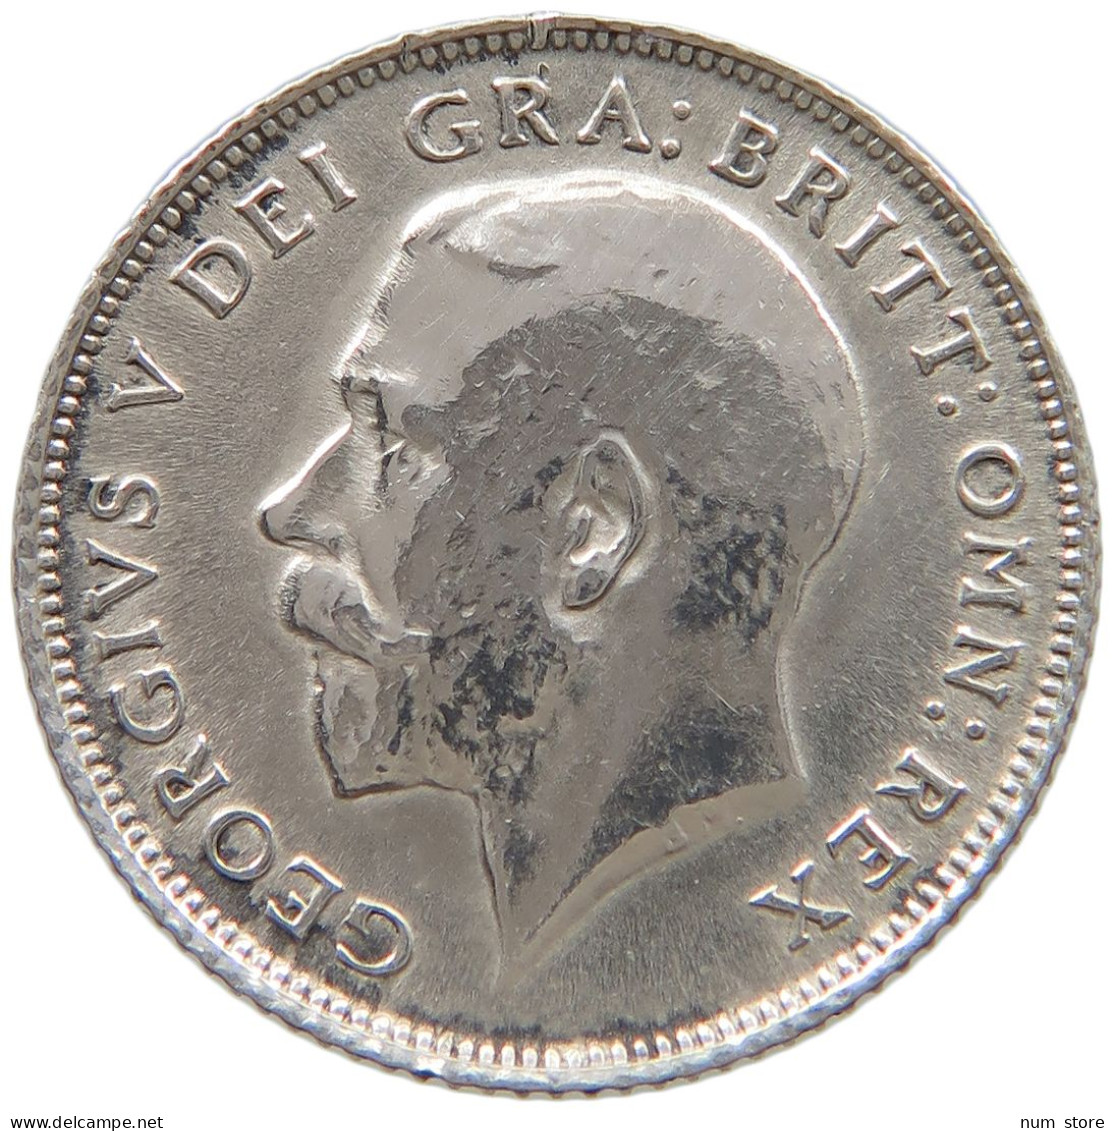 GREAT BRITAIN SIXPENCE 1915 George V. (1910-1936) #t158 0405 - H. 6 Pence